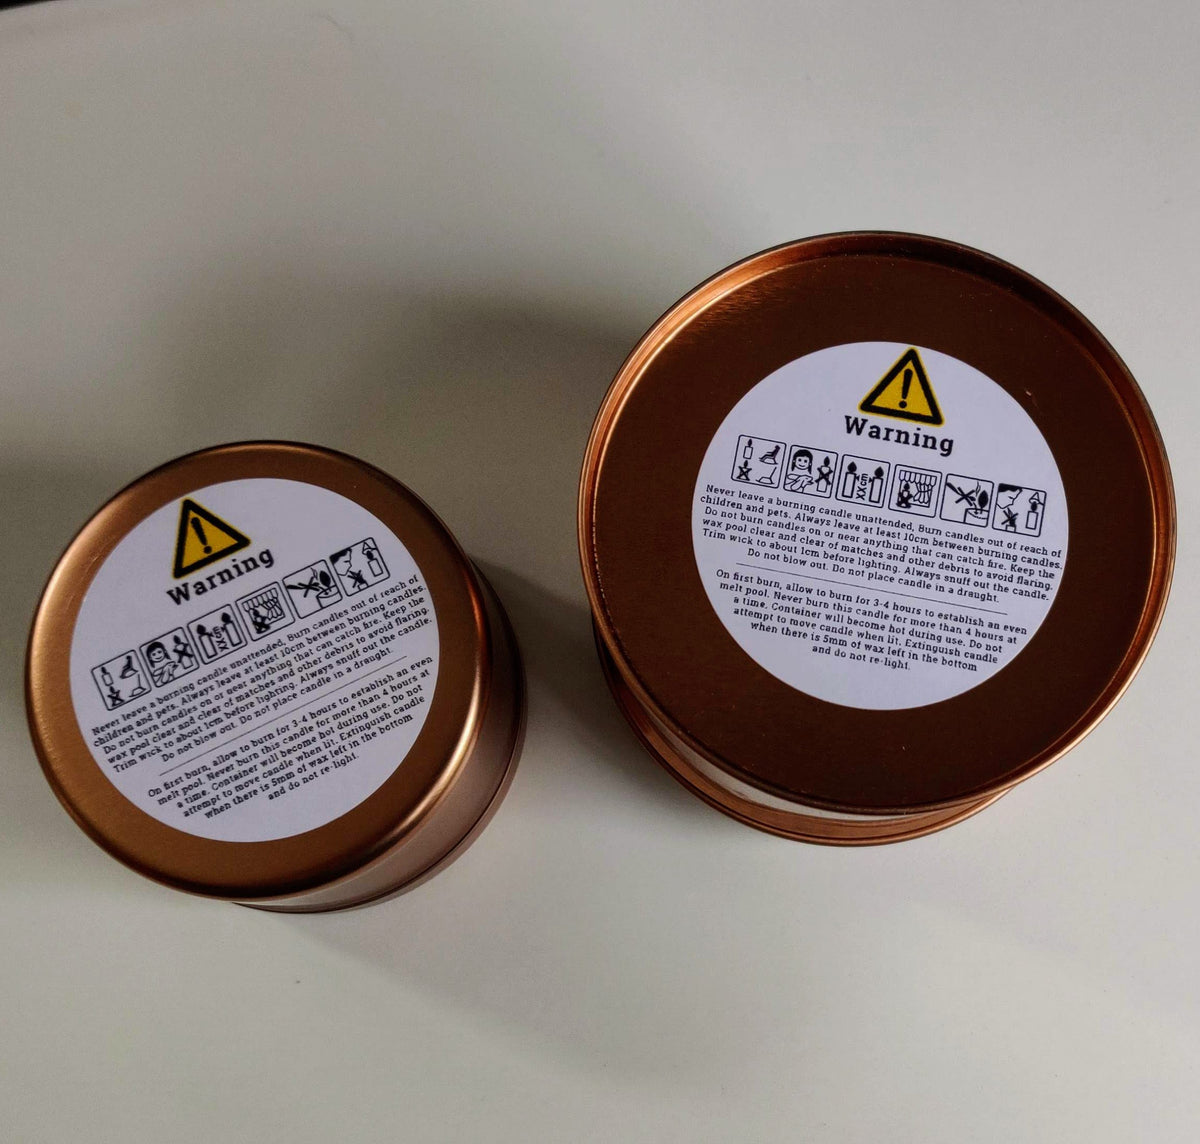 Natural Wax 50mm Candle Warning Labels (x100) - Unbranded